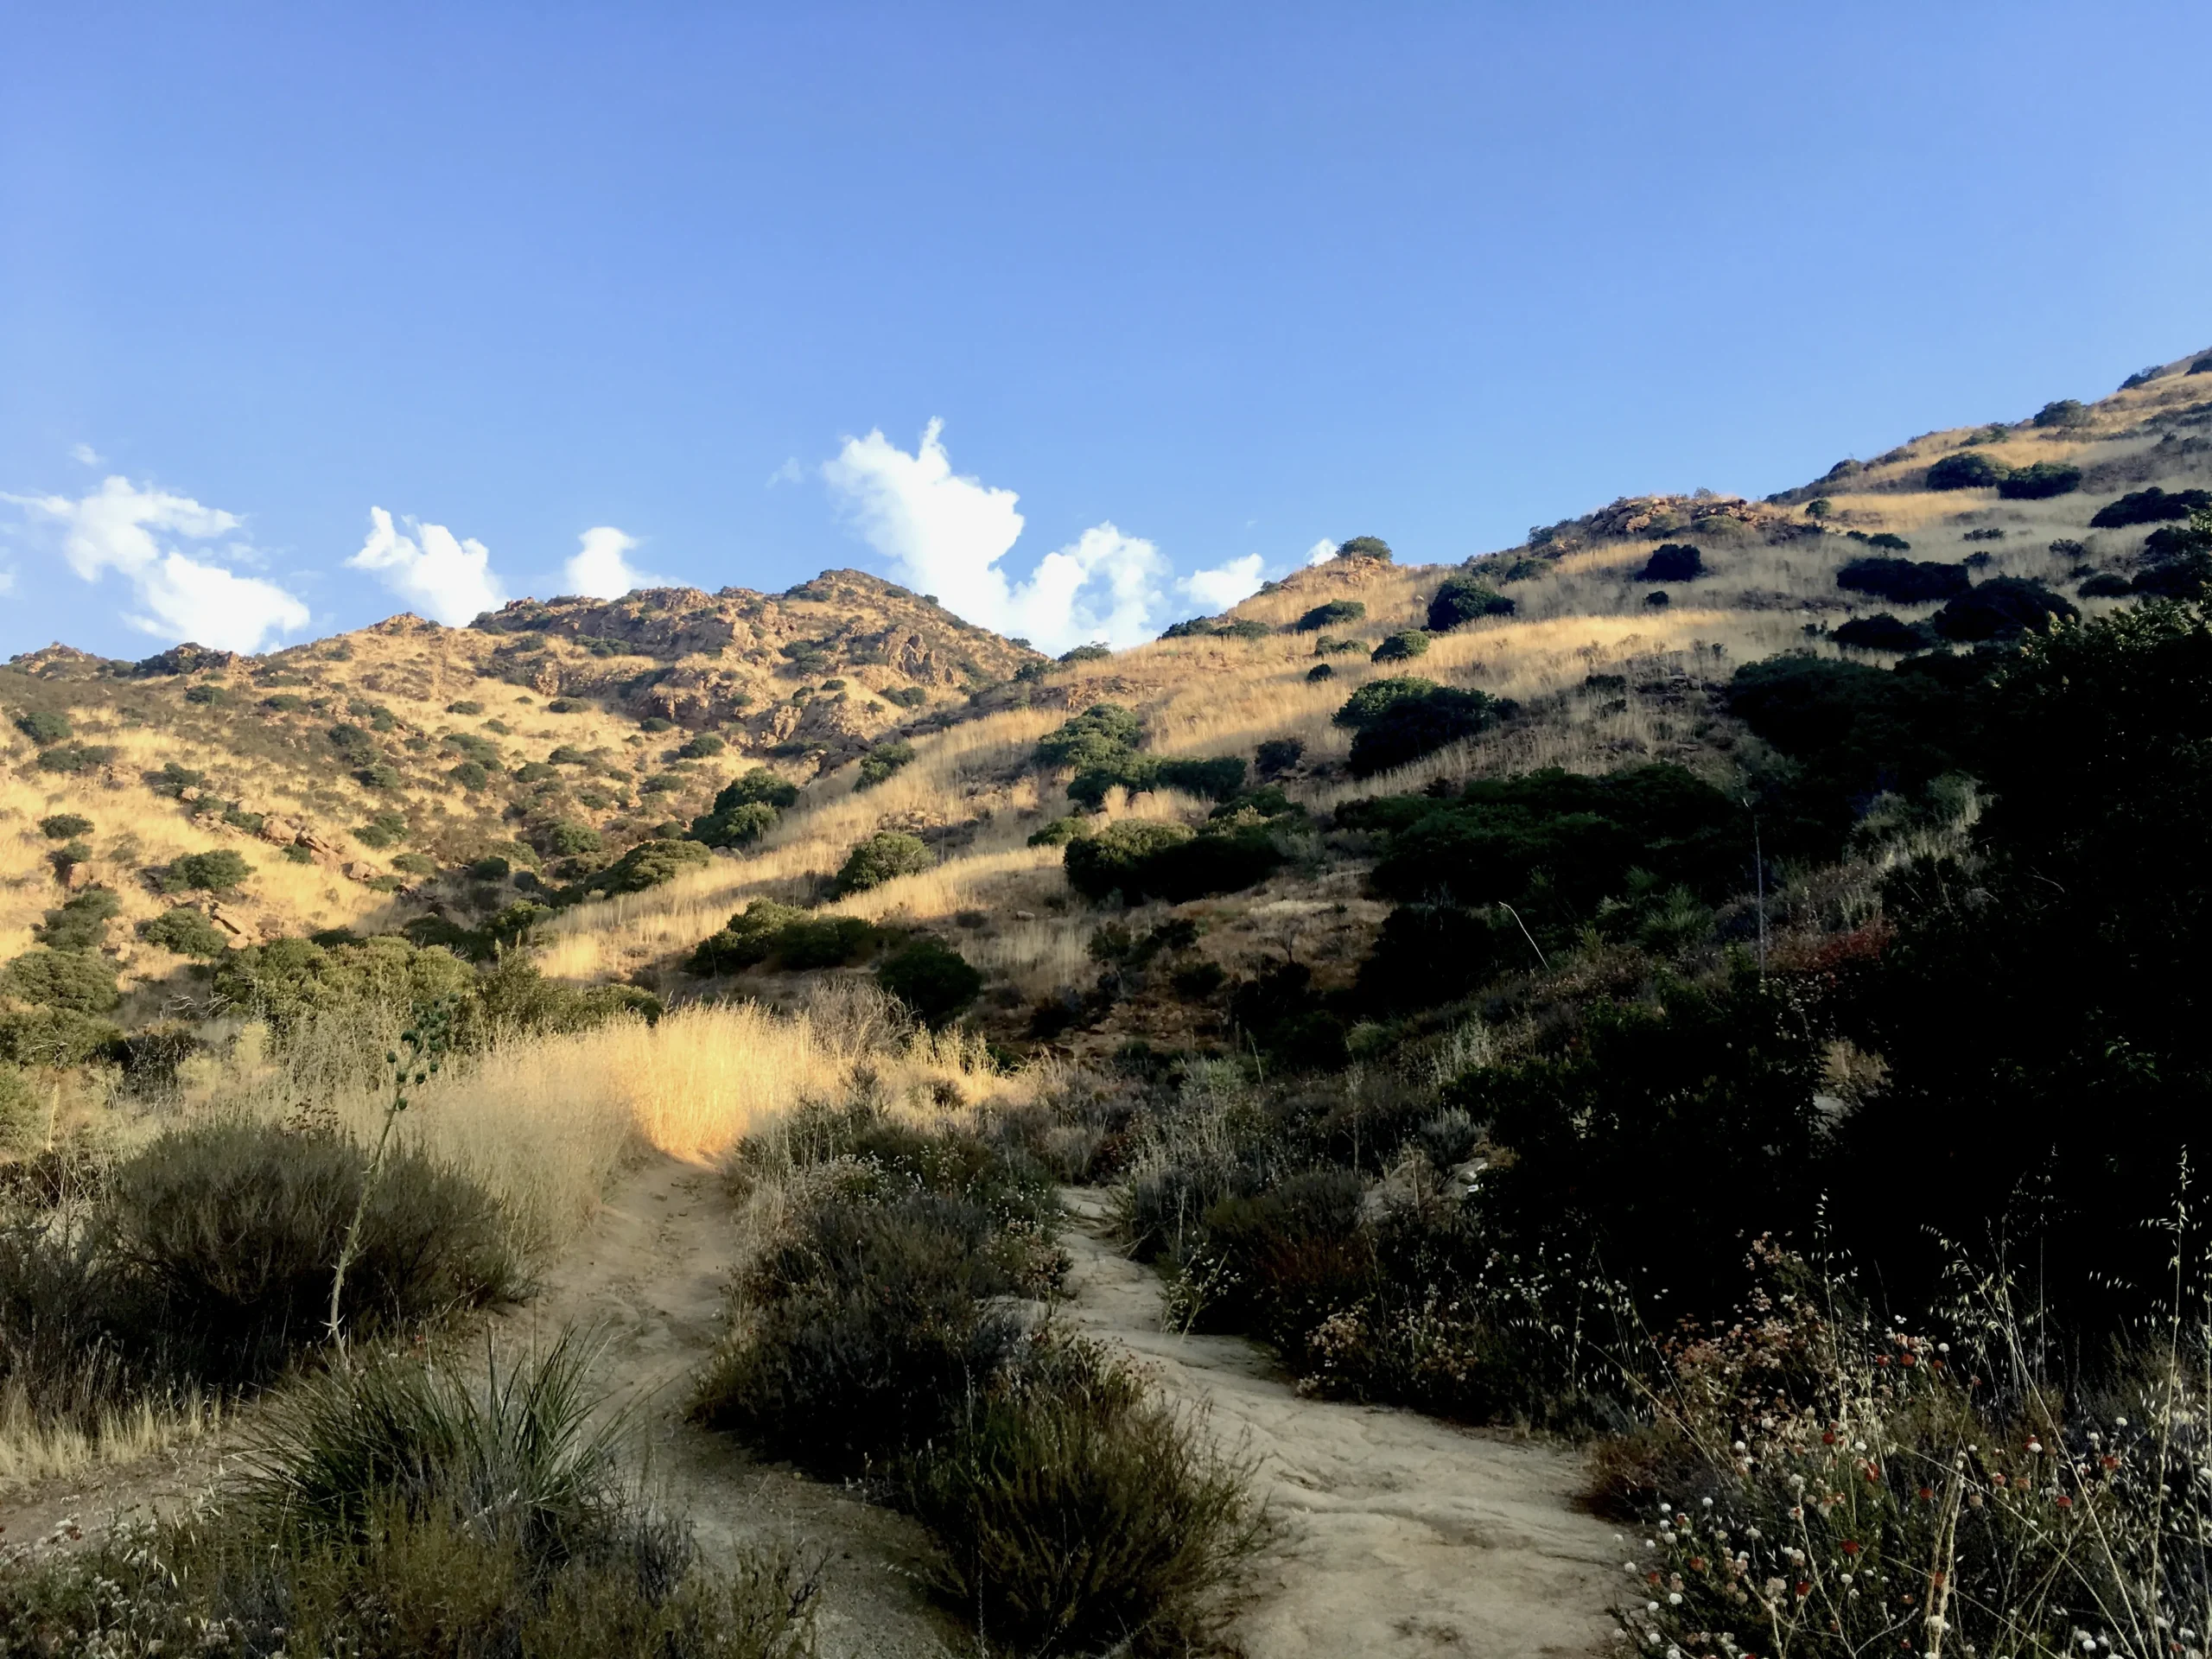 Scenic Chaparral trail in the Santa Monica Mountains near Agoura Hills, CA - Home of Chaparral Software: Your database, API, and AI solution partner. (Photo credit: Russell Kohn)